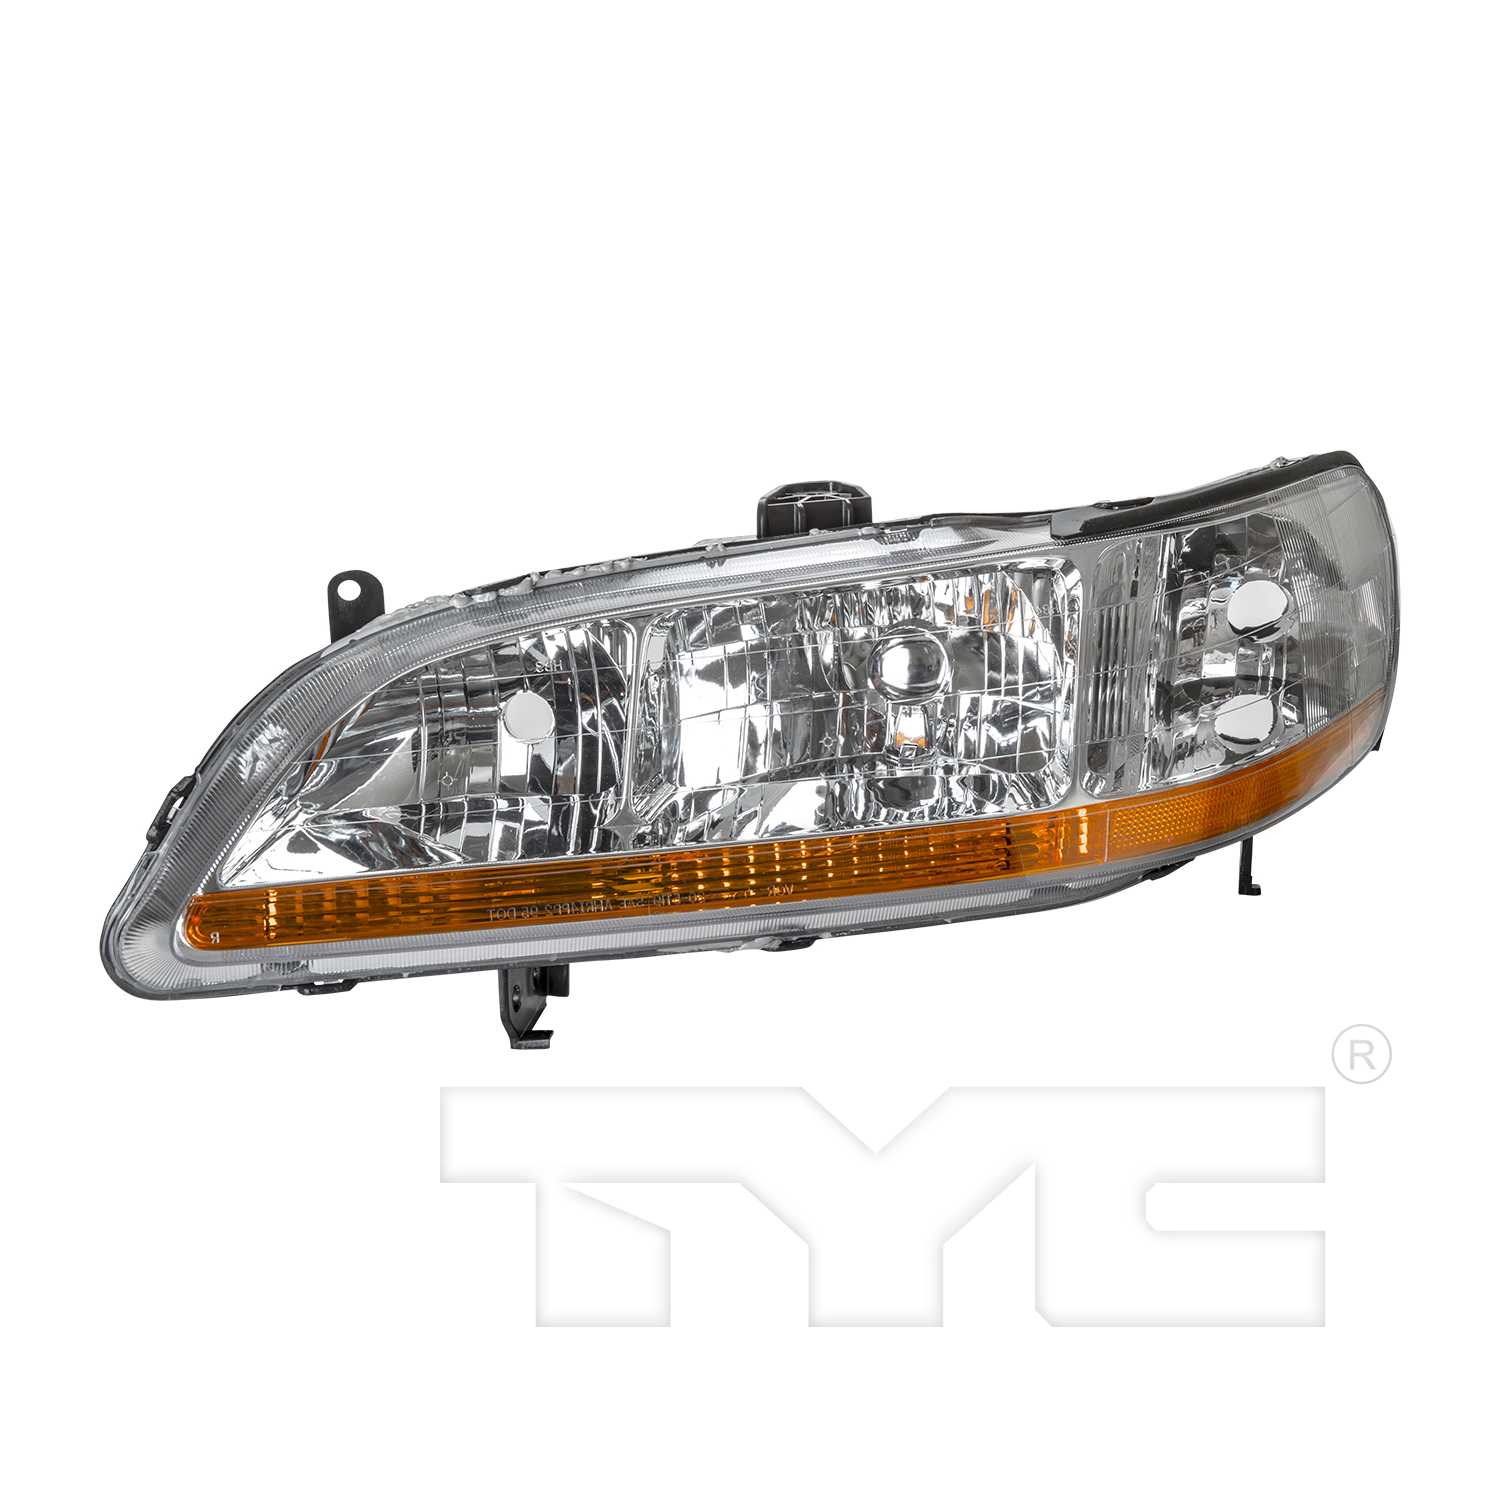 Aftermarket HEADLIGHTS for HONDA - ACCORD, ACCORD,01-02,LT Headlamp assy composite